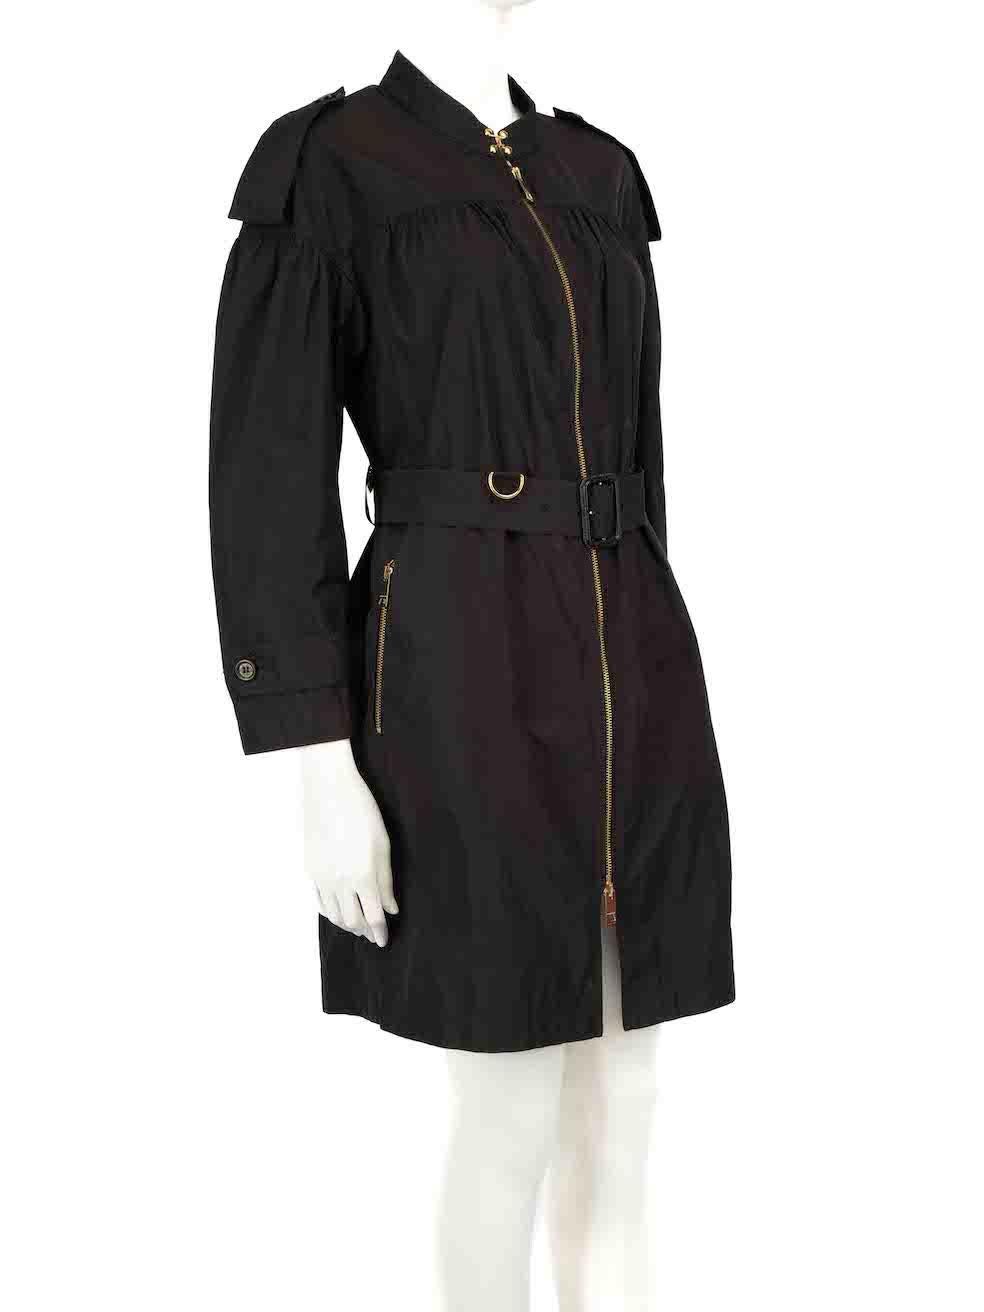 CONDITION is Good. General wear to coat is evident. Moderate signs of wear to the overall surface with pilling and wearing away to the felted texture on this used Burberry designer resale item.
 
 
 
 Details
 
 
 The Mersey model
 
 Red
 
 Wool
 
